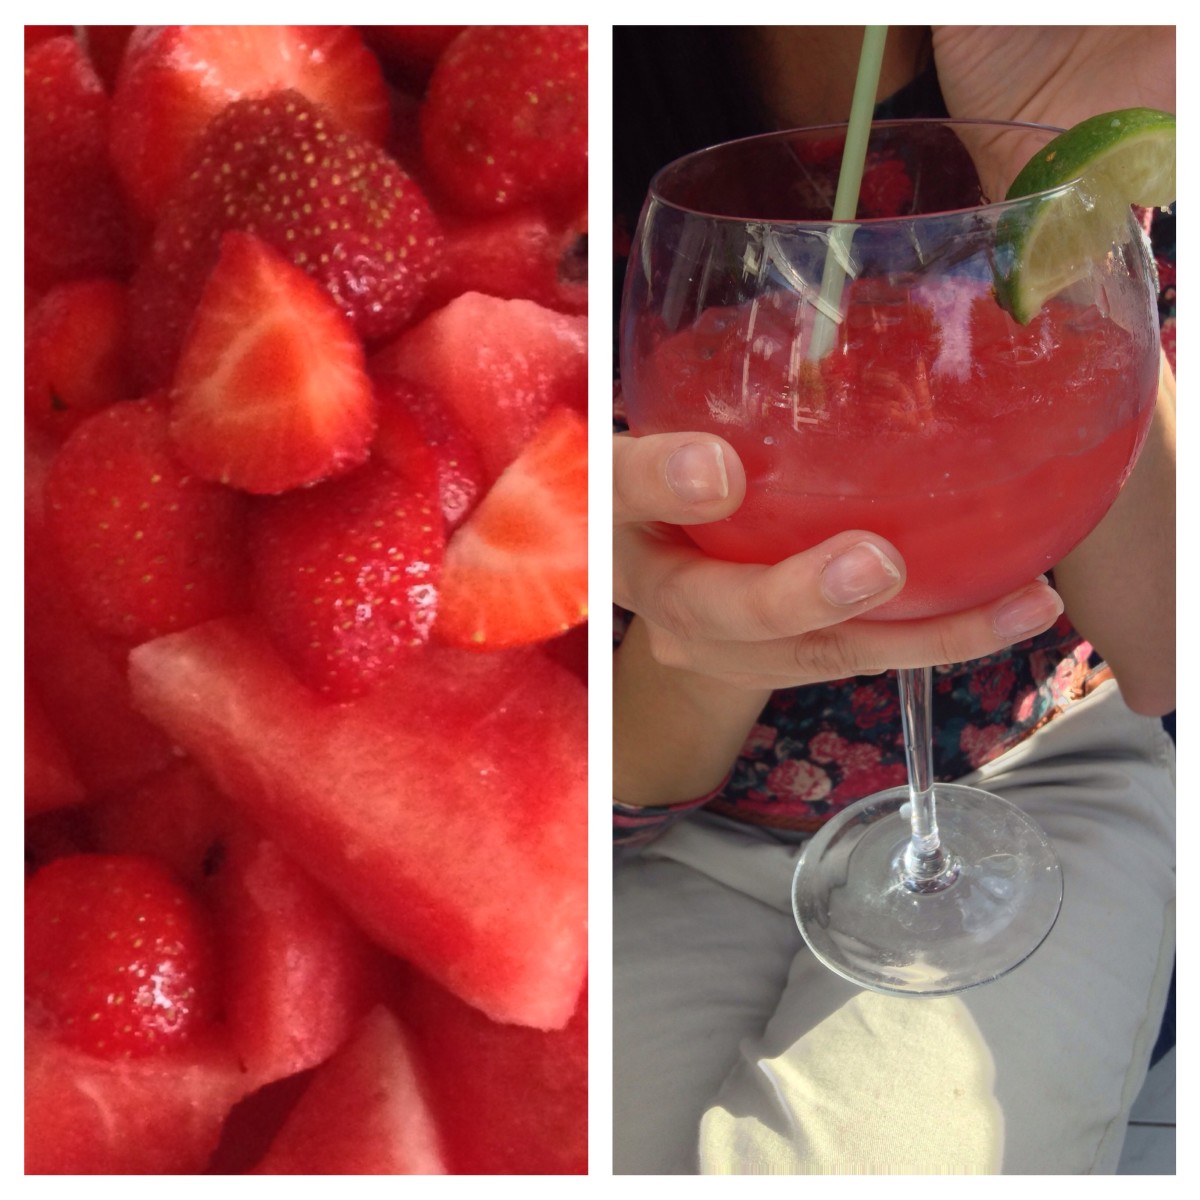 Strawberry and Melon Medley and Cocktail Consumption